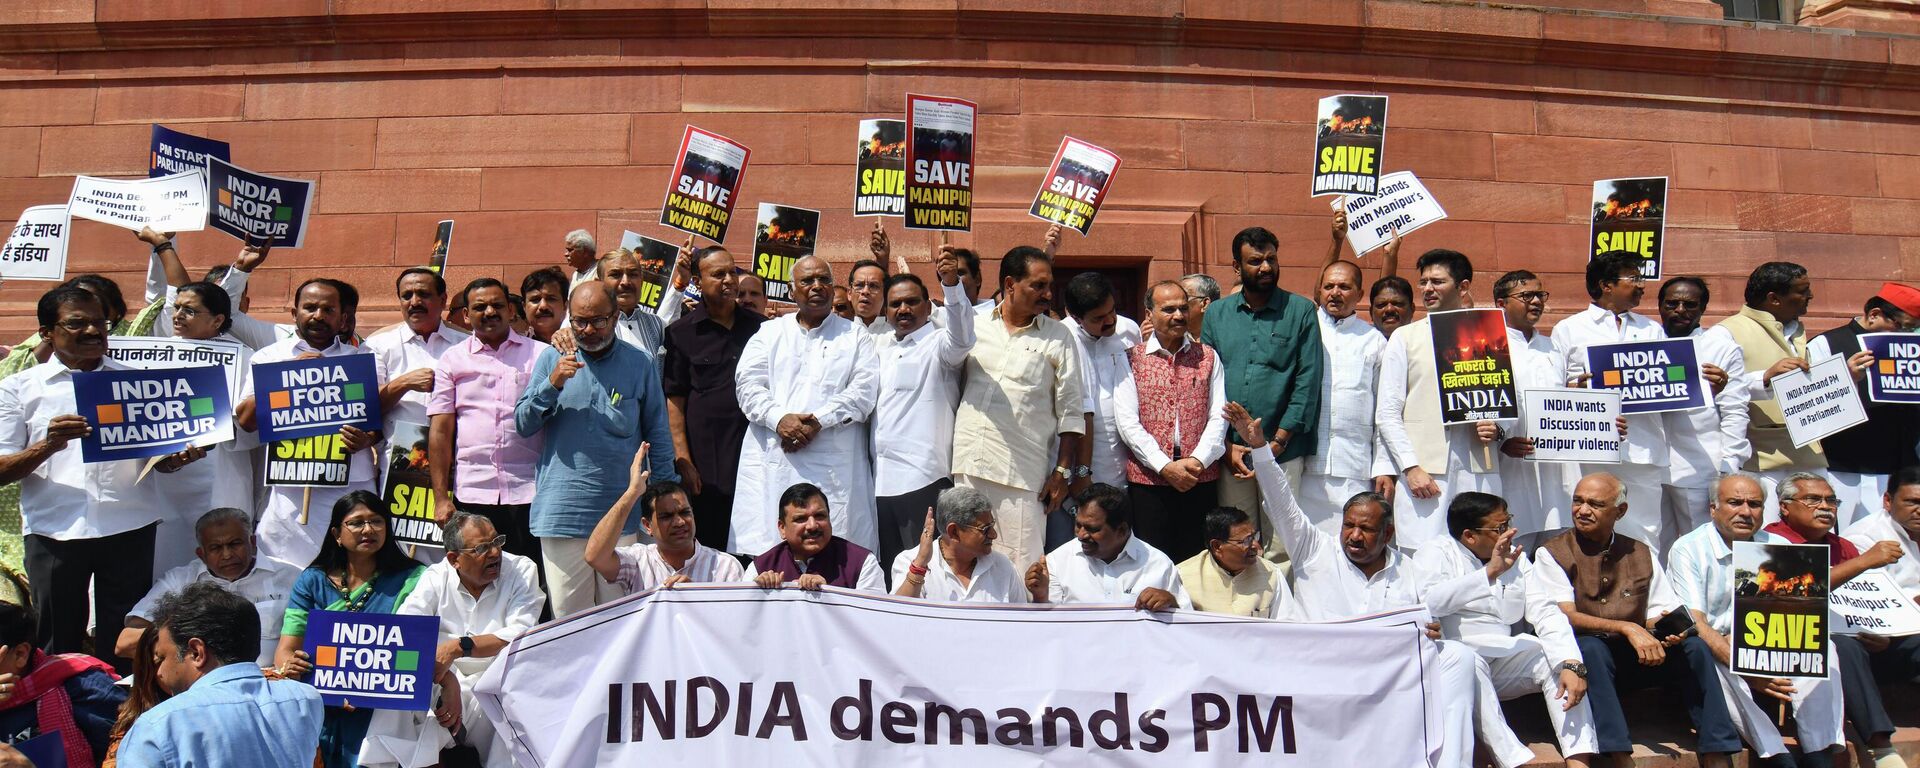 Opposition lawmakers demanding a statement from Prime Minister Narendra Modi on the violence in Manipur state carry placards and a banner with name of INDIA outside the Parliament building in New Delhi, India, Monday, July 24, 2023. India’s fractured opposition parties have joined forces in a rare show of unity and formed an alliance called 'INDIA' to unseat the popular but polarizing prime minister Narendra Modi and his Hindu nationalist Bharatiya Janata Party. Last week, more than two dozen parties joined the alliance, named the Indian National Developmental Inclusive Alliance which is called INDIA for short. - Sputnik भारत, 1920, 26.07.2023